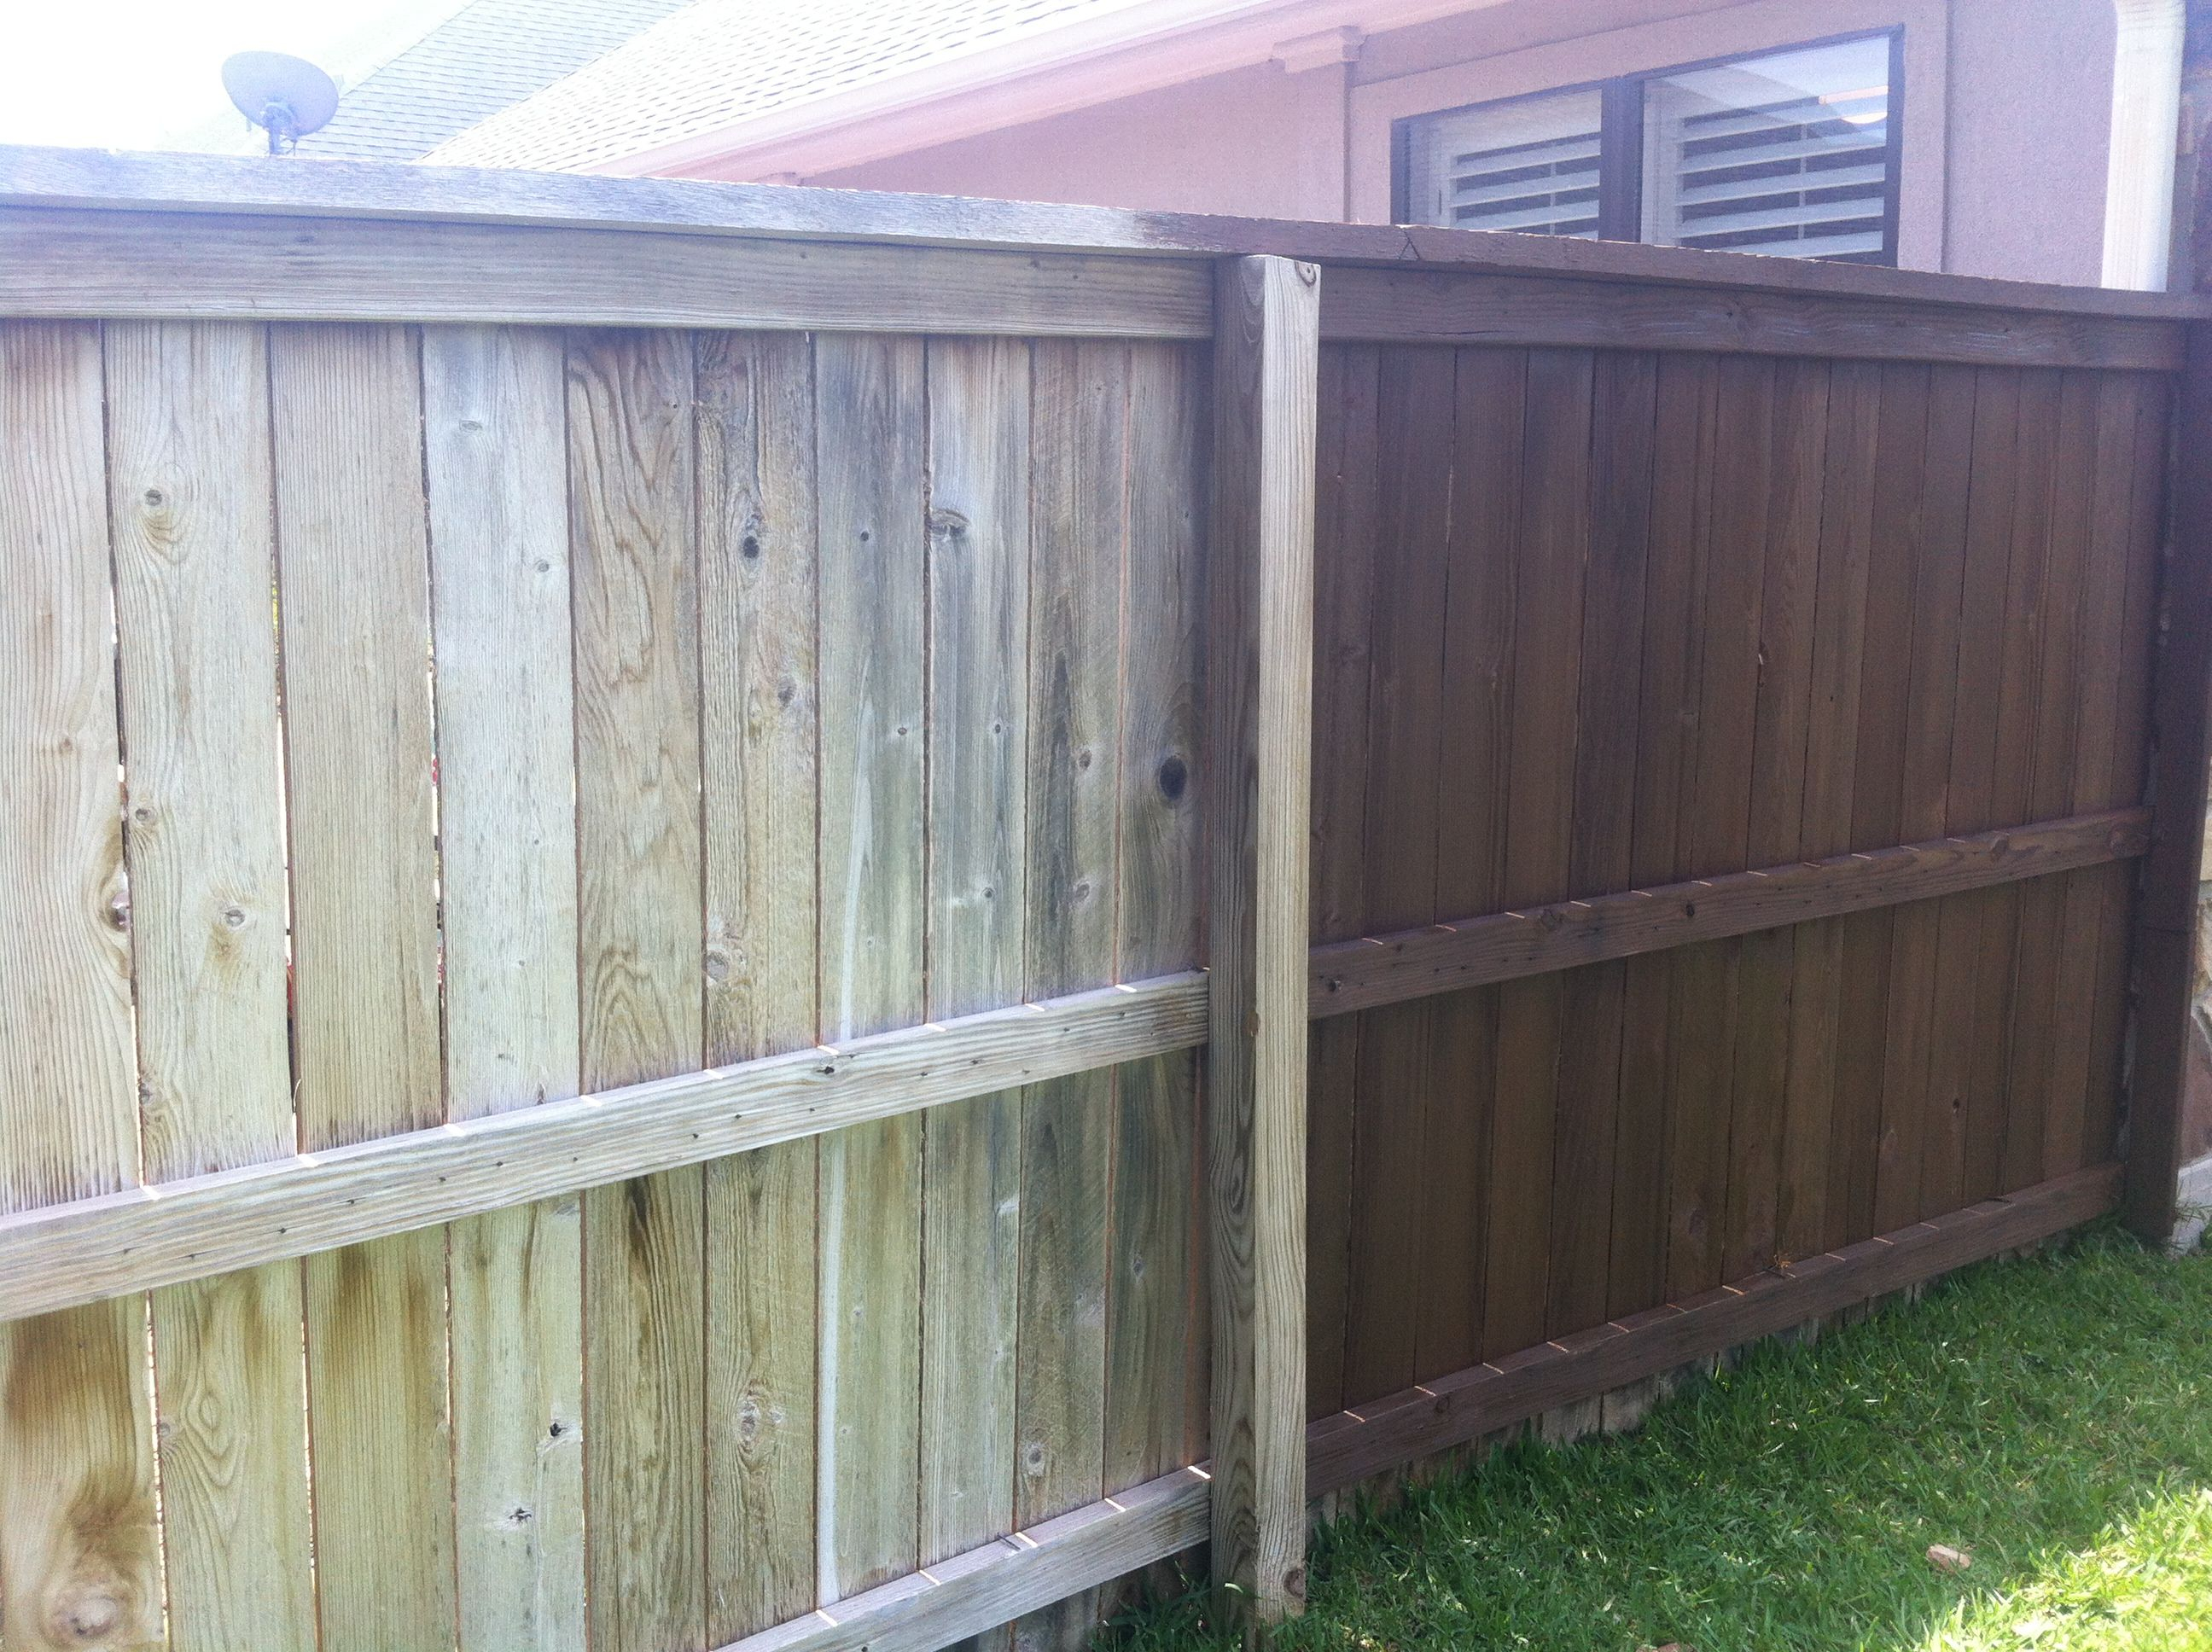 Staining A Wood Fence With Sprayer For Wood Stain Fences pertaining to dimensions 2592 X 1936